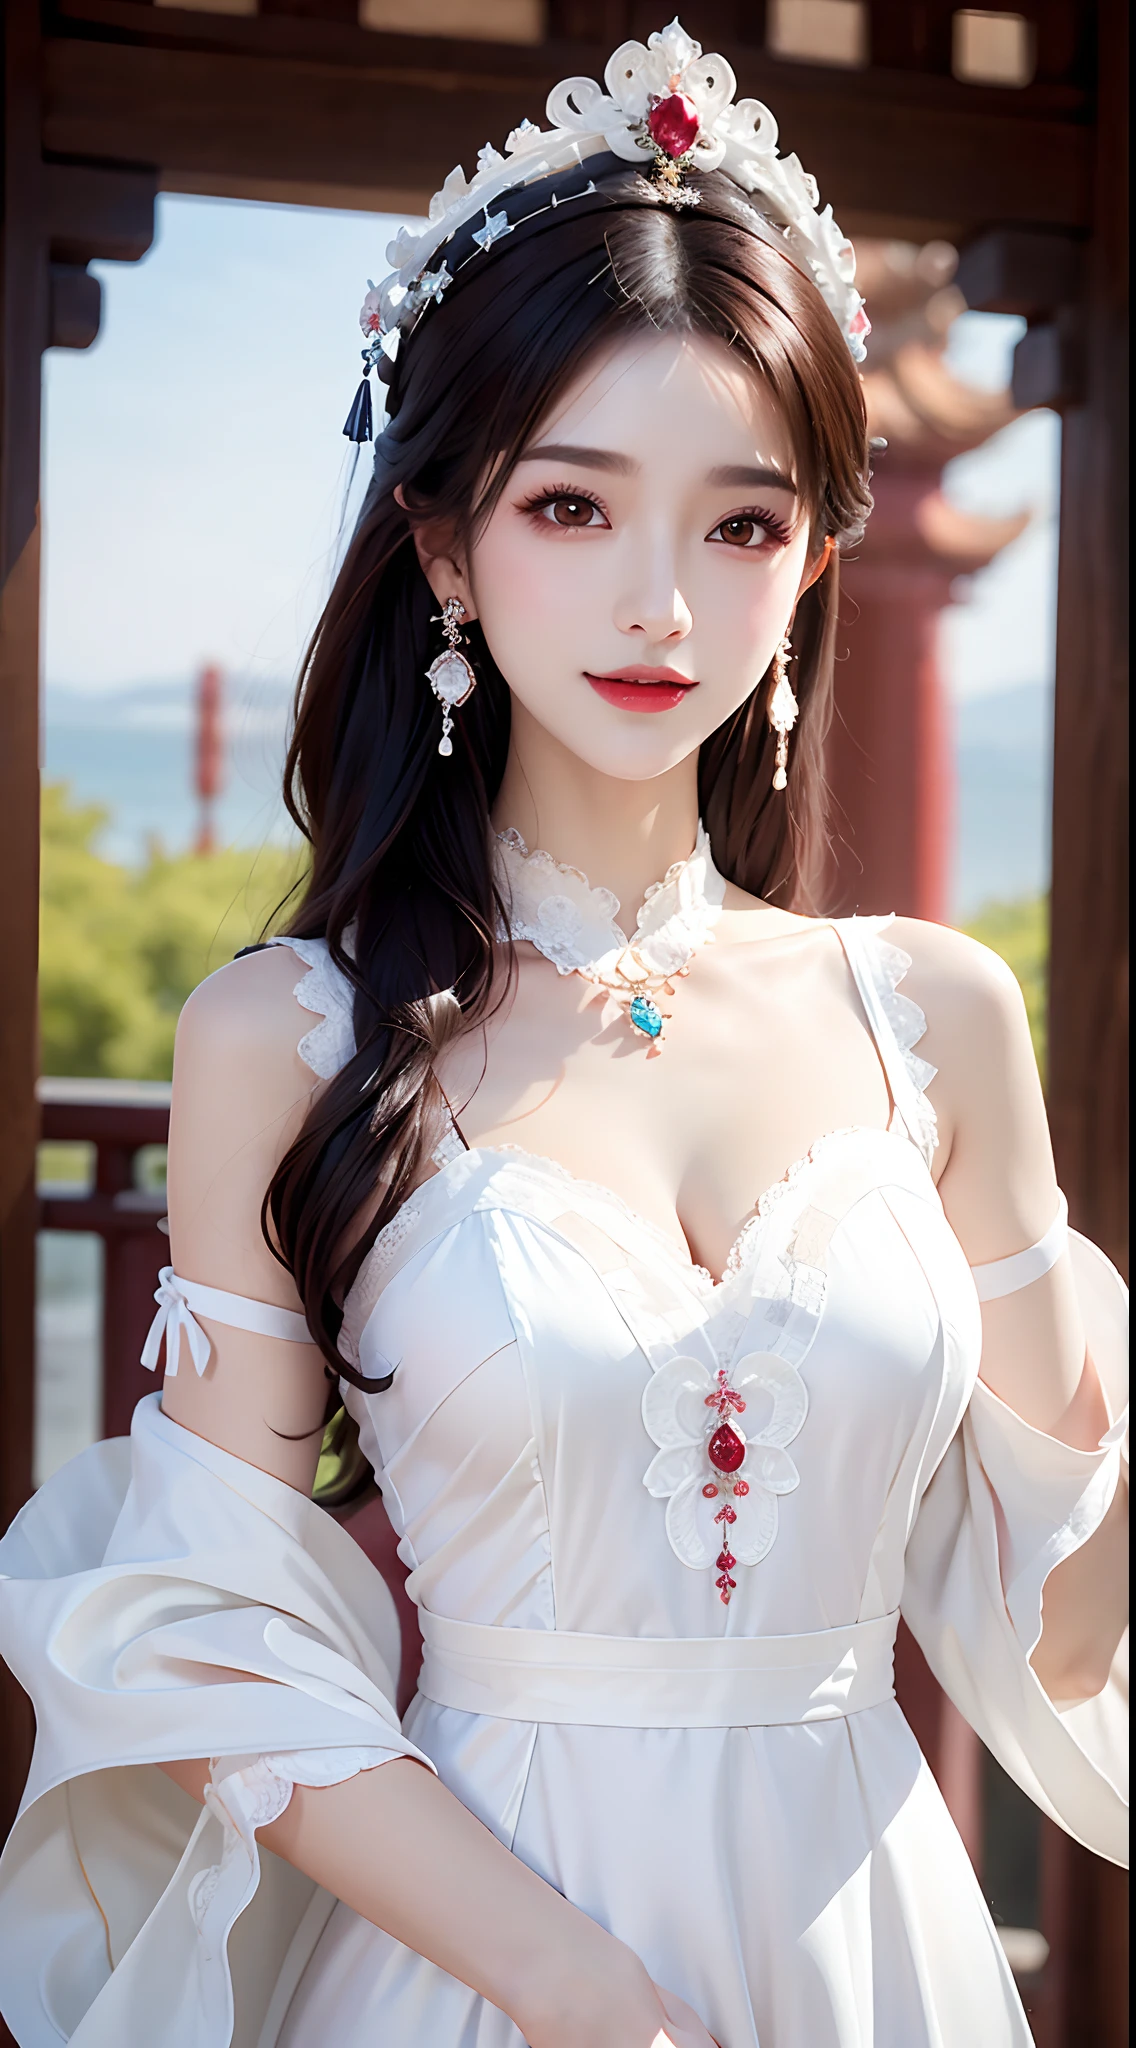 1 young empress wearing, white lace top, deep-breasted nightgown, Chinese-style clothes, ancient costumes with many phoenix patterns, flawless white and pink face, crown on her head, black hair hip length, very beautiful and sharp brown eyes, small red lips, painted lips, charming smile, jewelry worn around the neck, earrings, white and even teeth, high nose, big round breasts, elongated legs, thin mesh black socks, portrait, most realistic, highest quality, best pixels, 8k ultra,